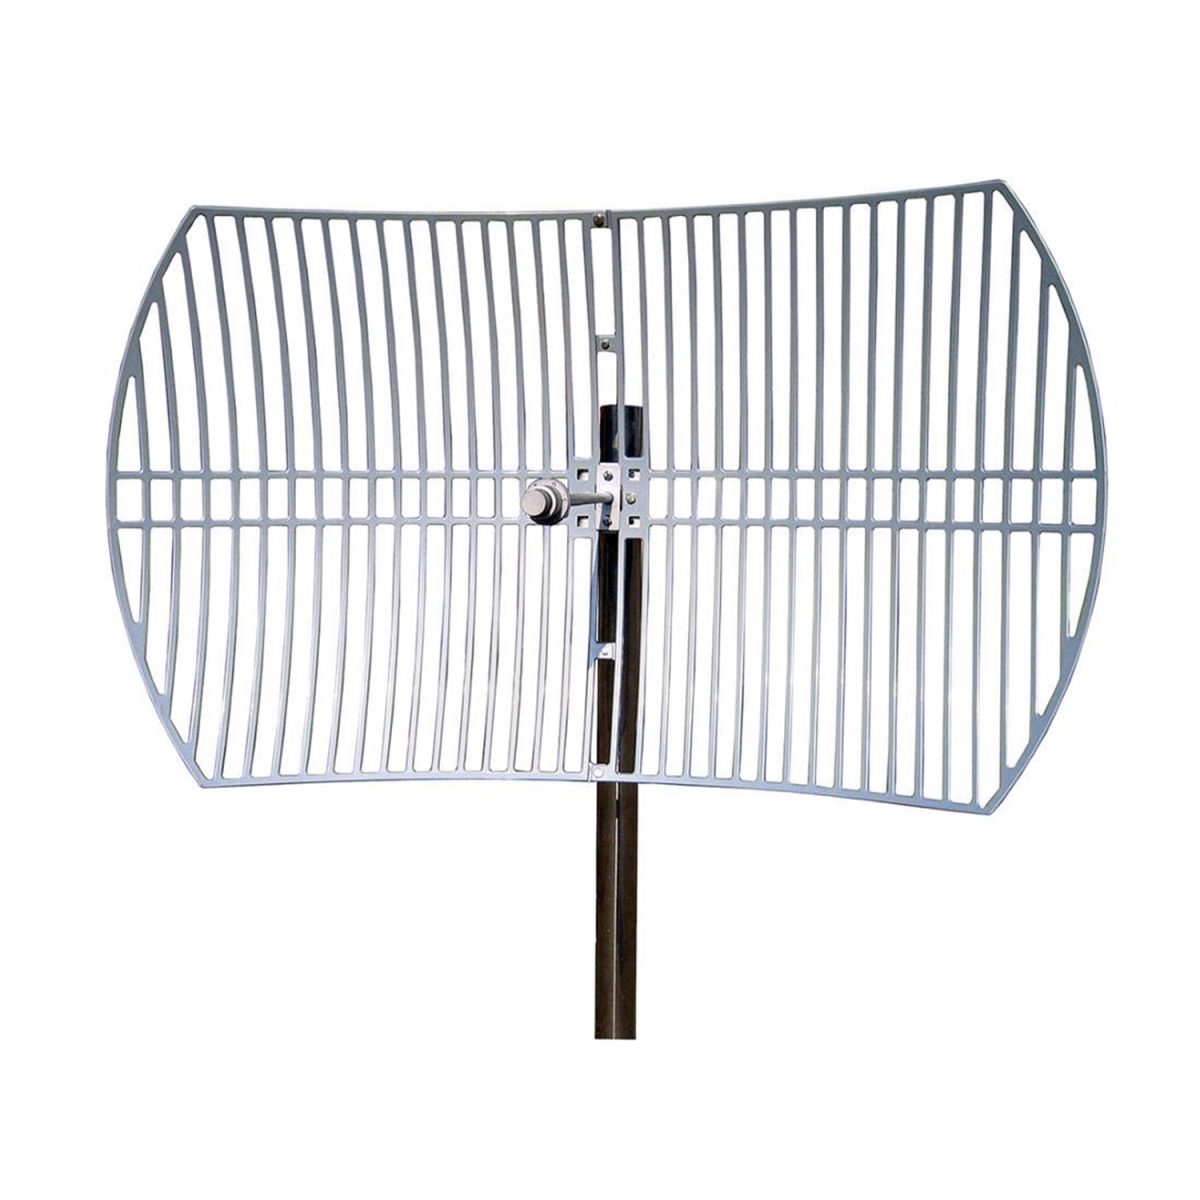 Picture of Turmode WAG58293 Grid Parabolic WiFi Antenna for 5.8GHz